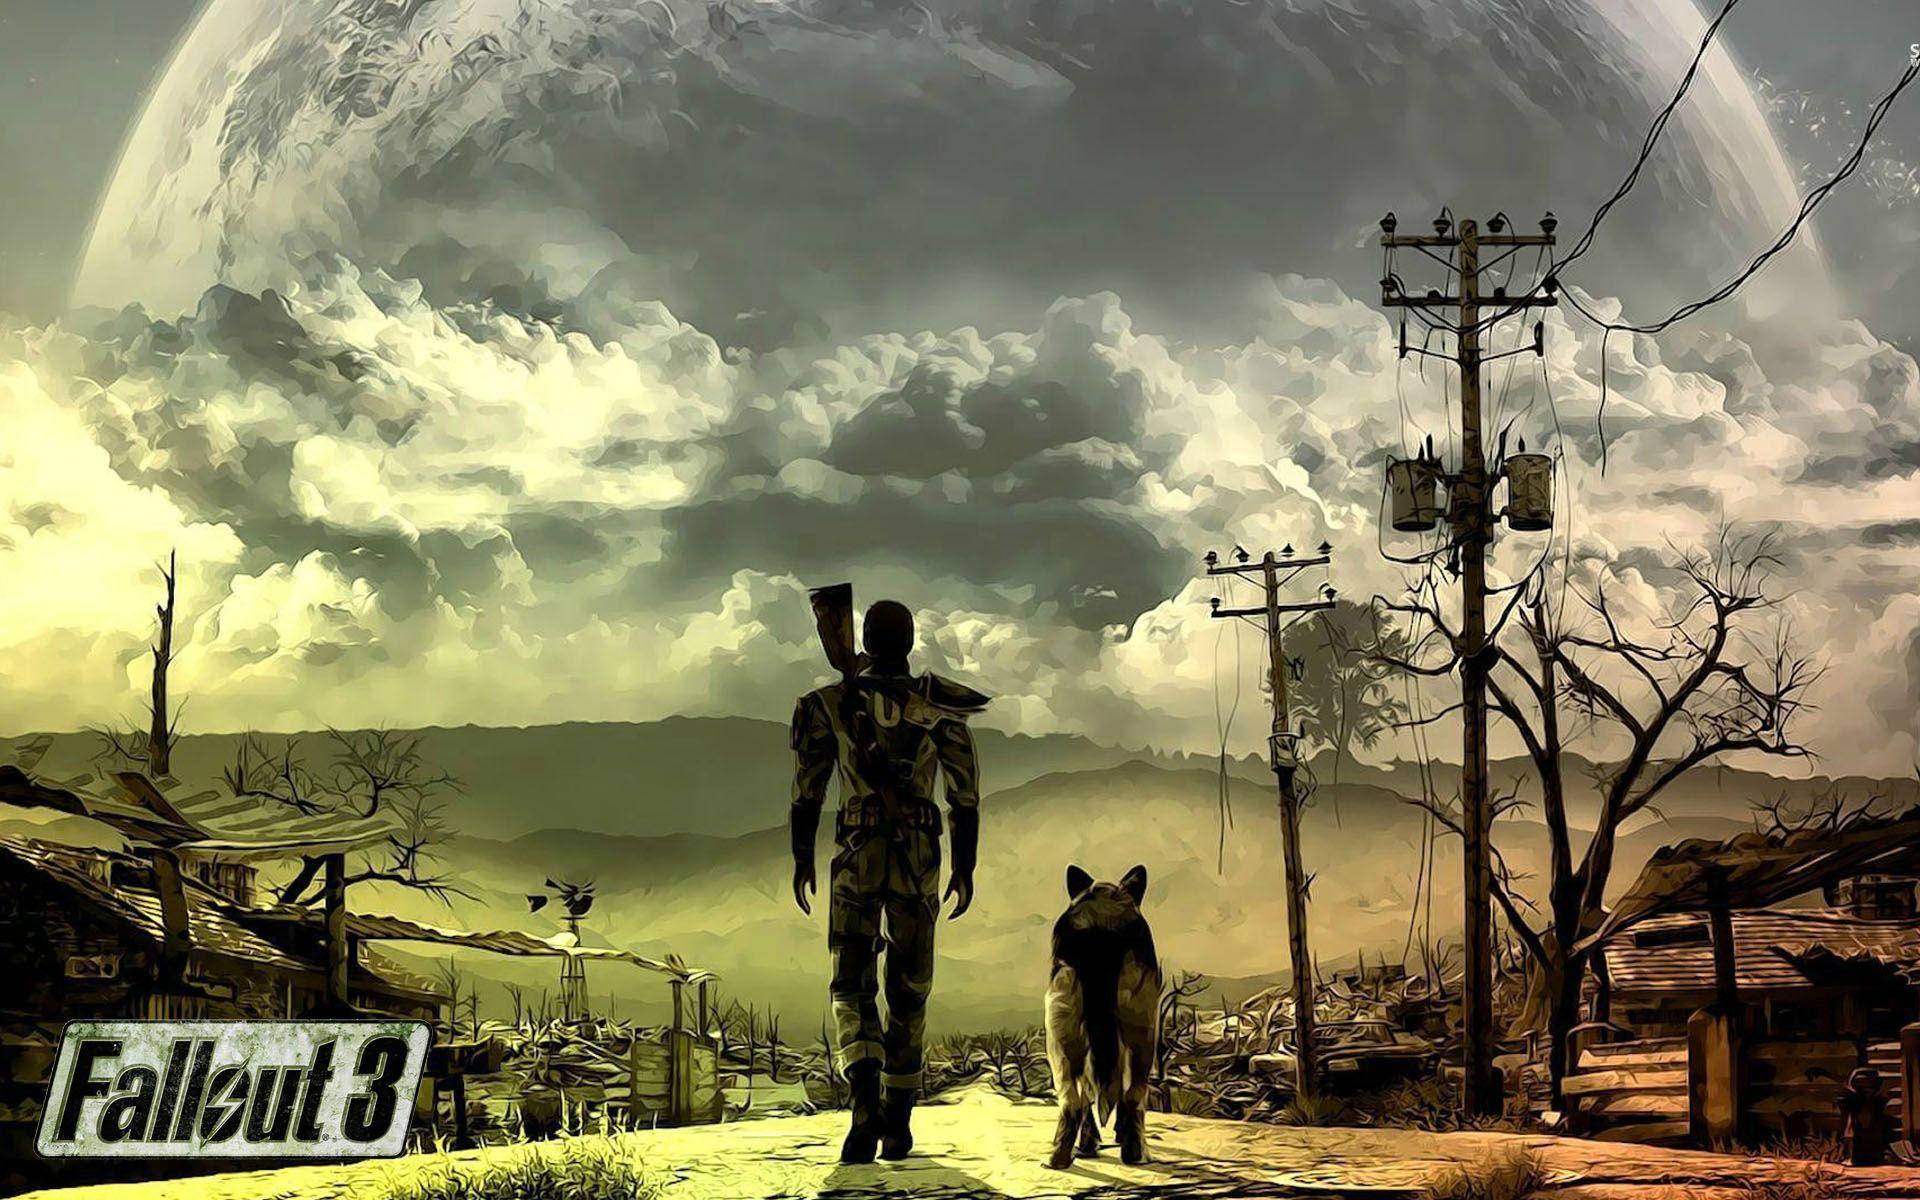 GM 556: Fallout 3 Wallpaper, Picture Of Fallout 3 HQFX, 34 Good